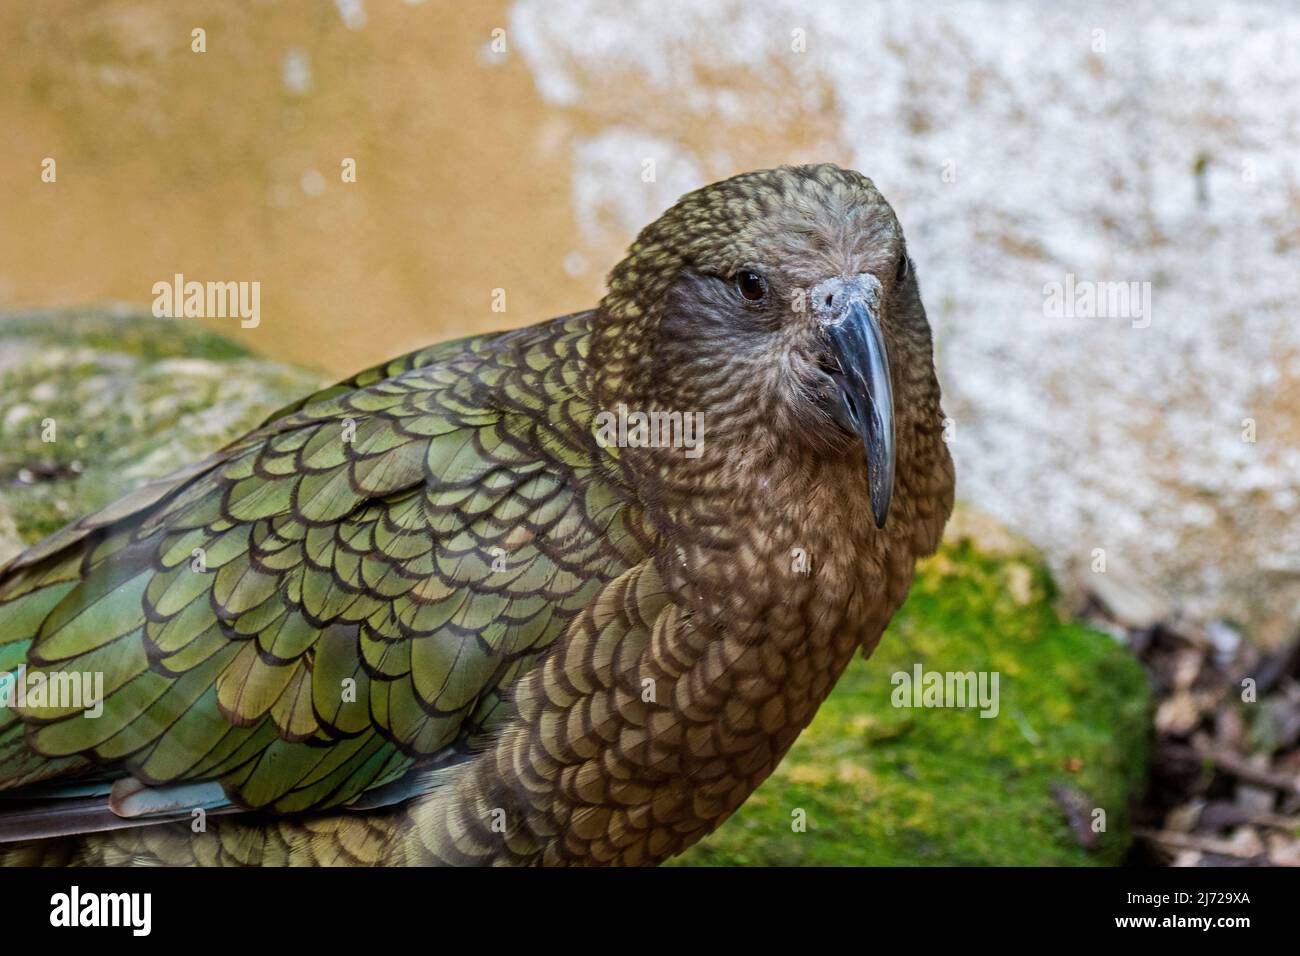 Close-up portrait of kea (Nestor notabilis), large parrot native to the forested and alpine regions of the South Island of New Zealand Stock Photo